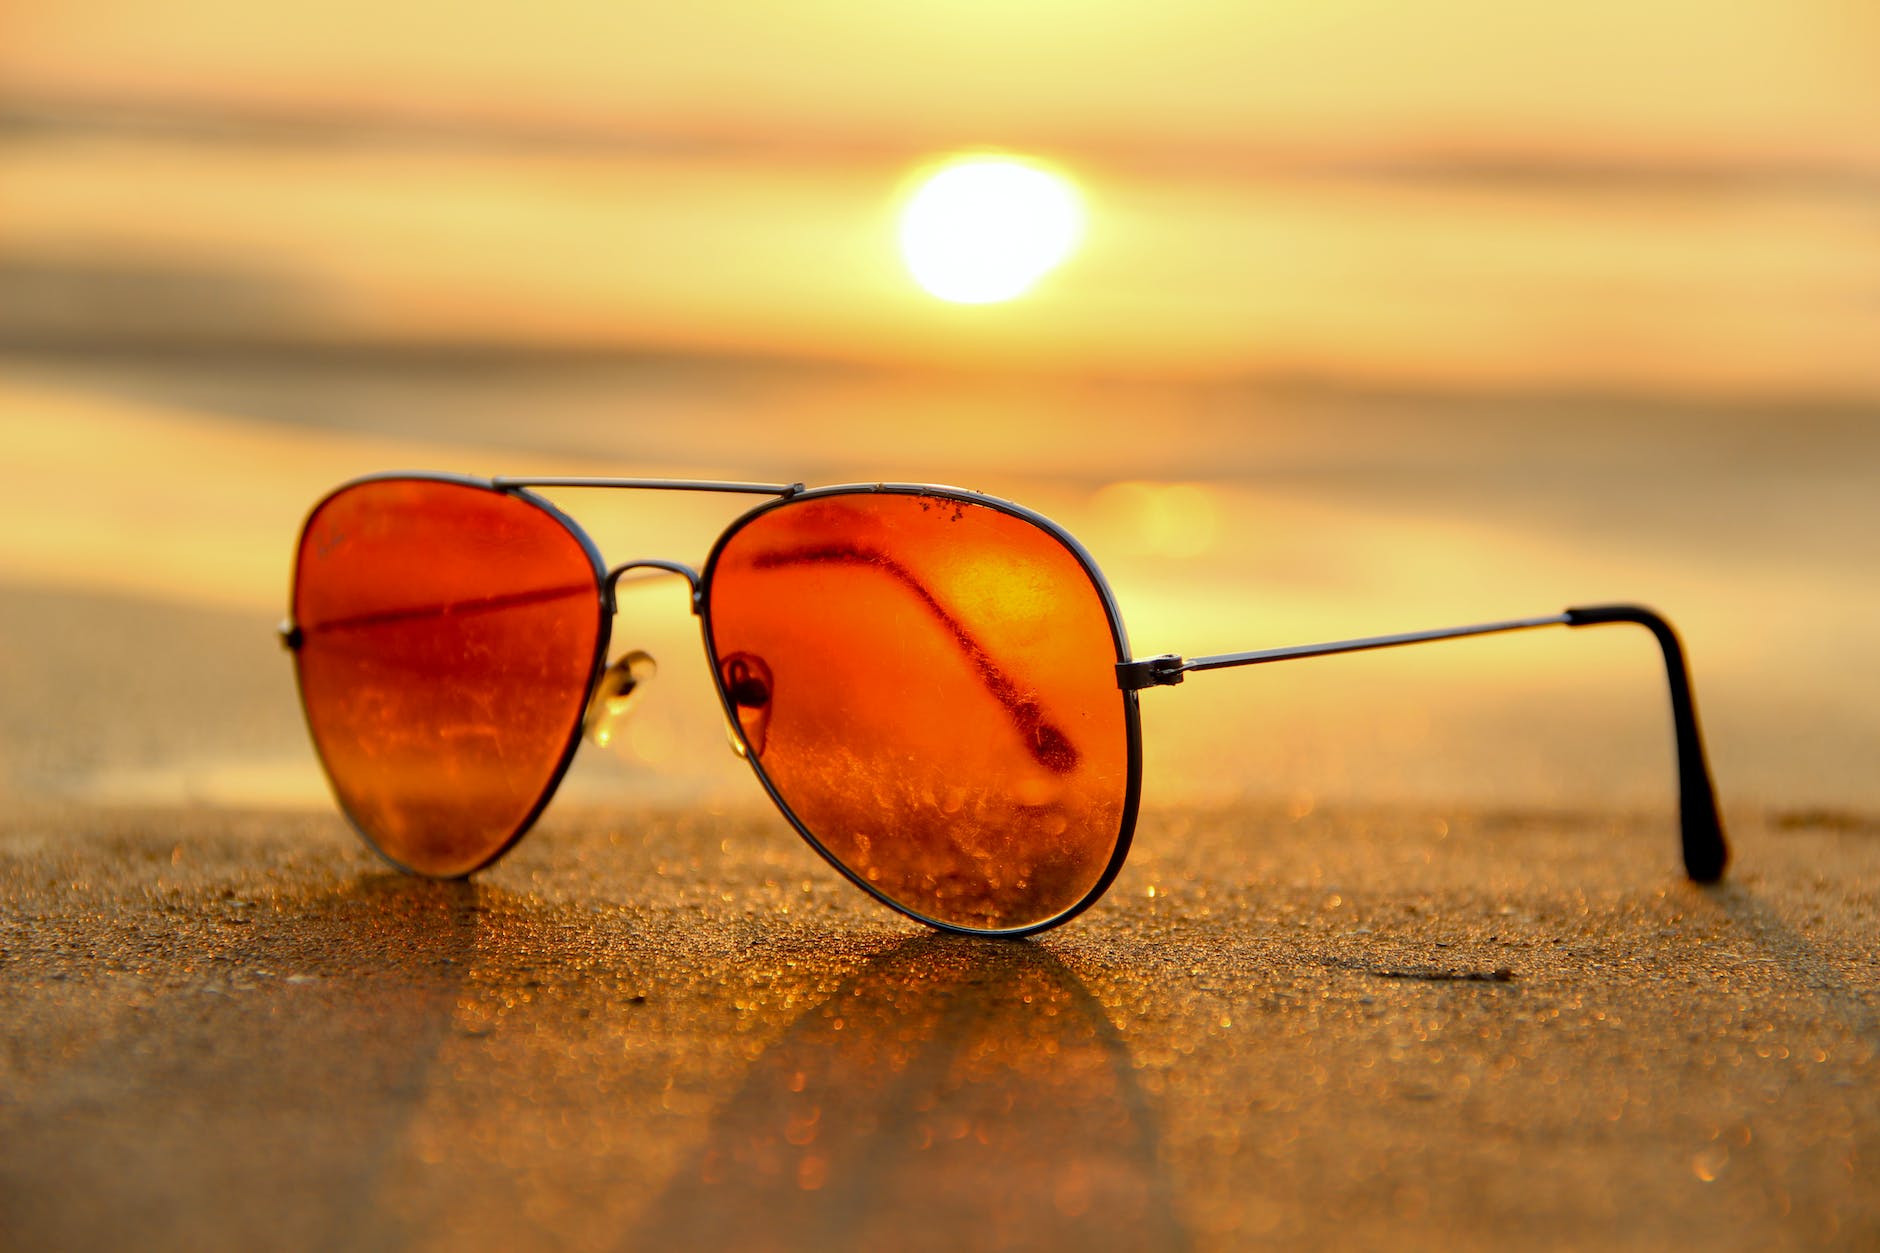 red lens sunglasses on sand near sea at sunset selective focus photography